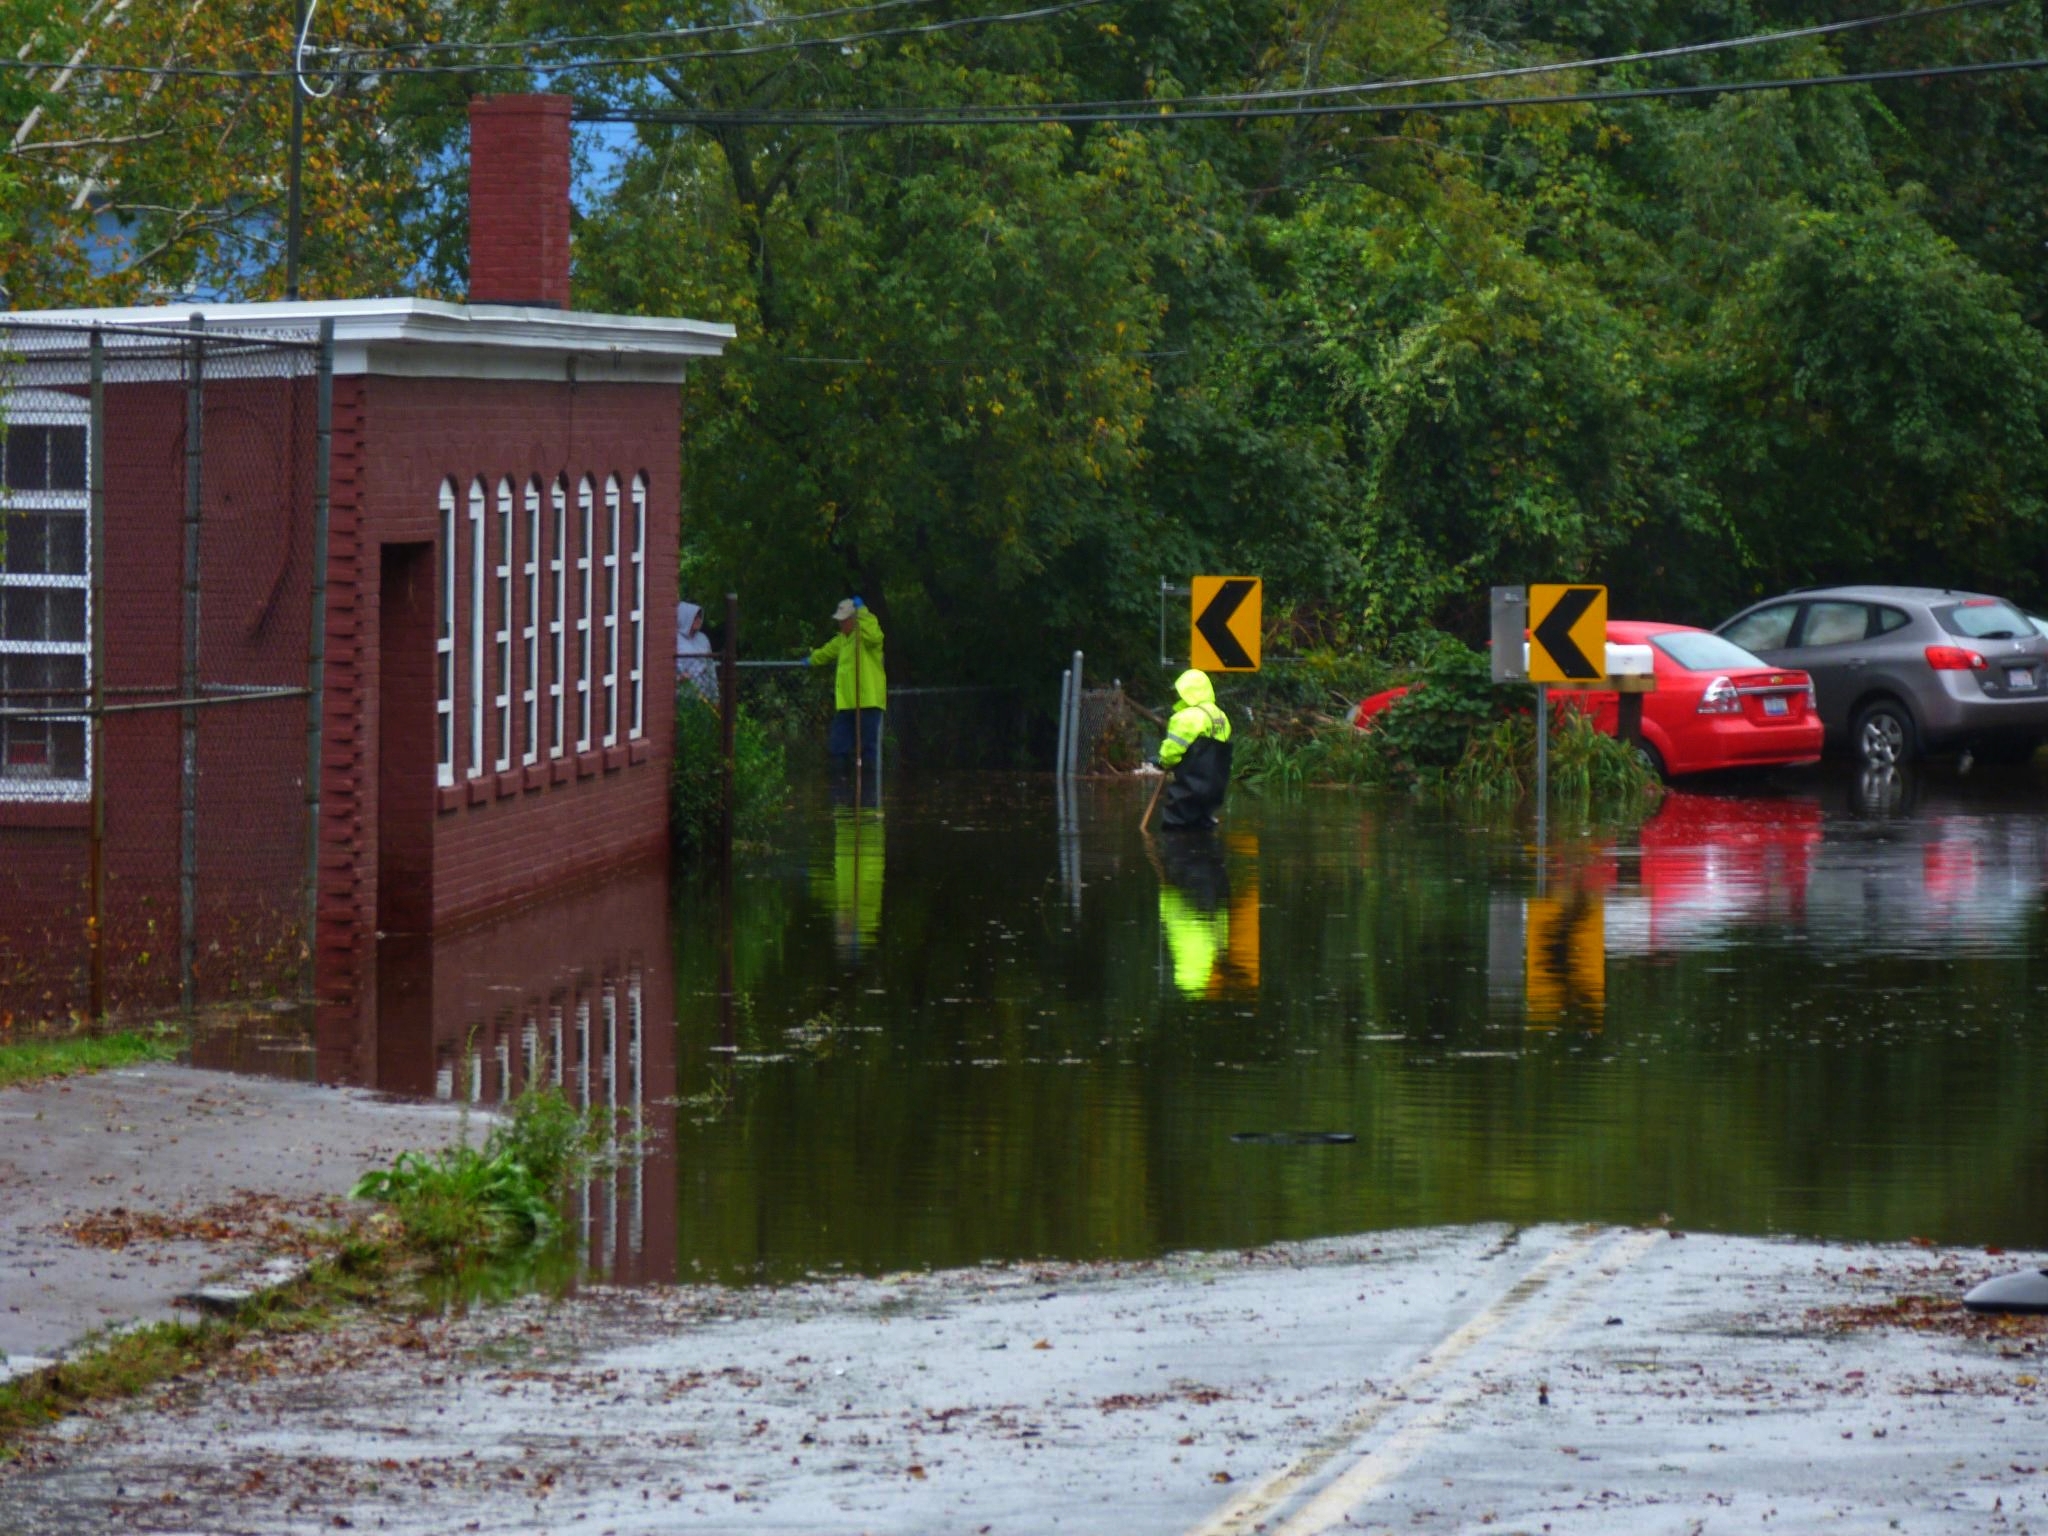 two people are working on their cars through water